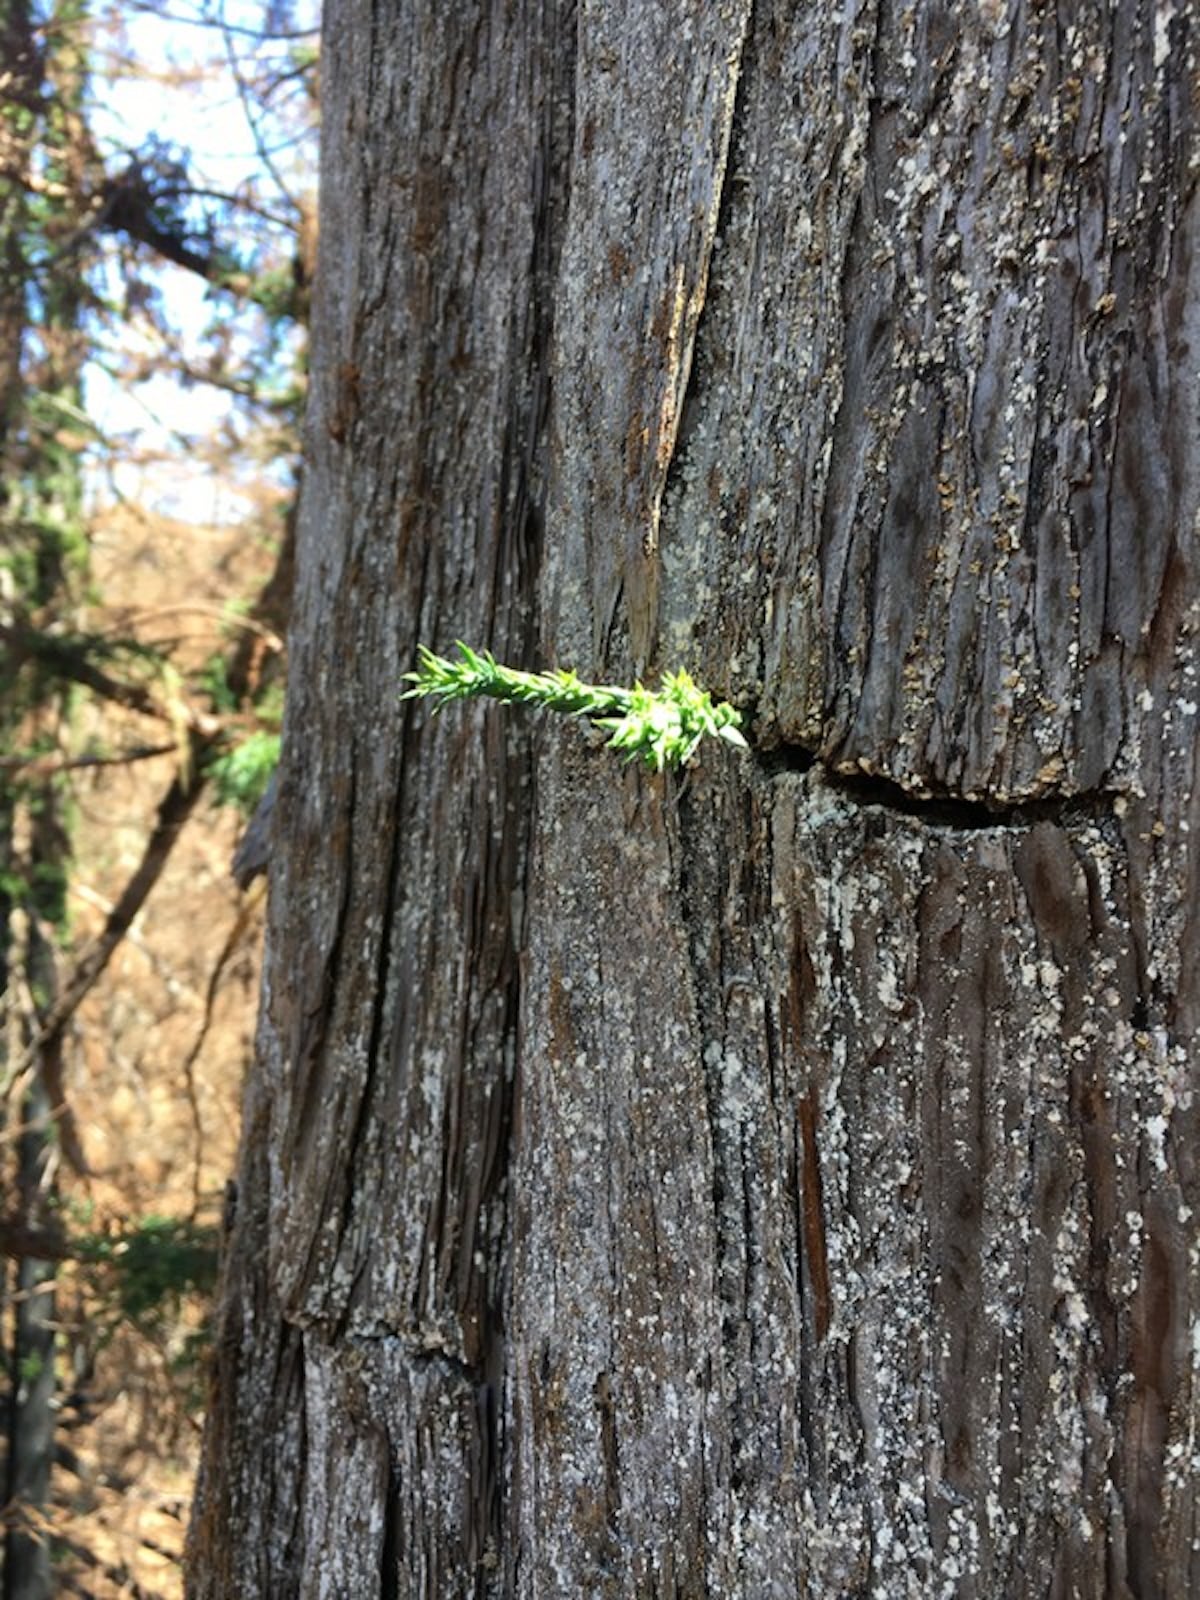 A previously dormant bud sprouts from a coastal redwood that was burned and thought to be dead in the CZU Lightning Complex Fire